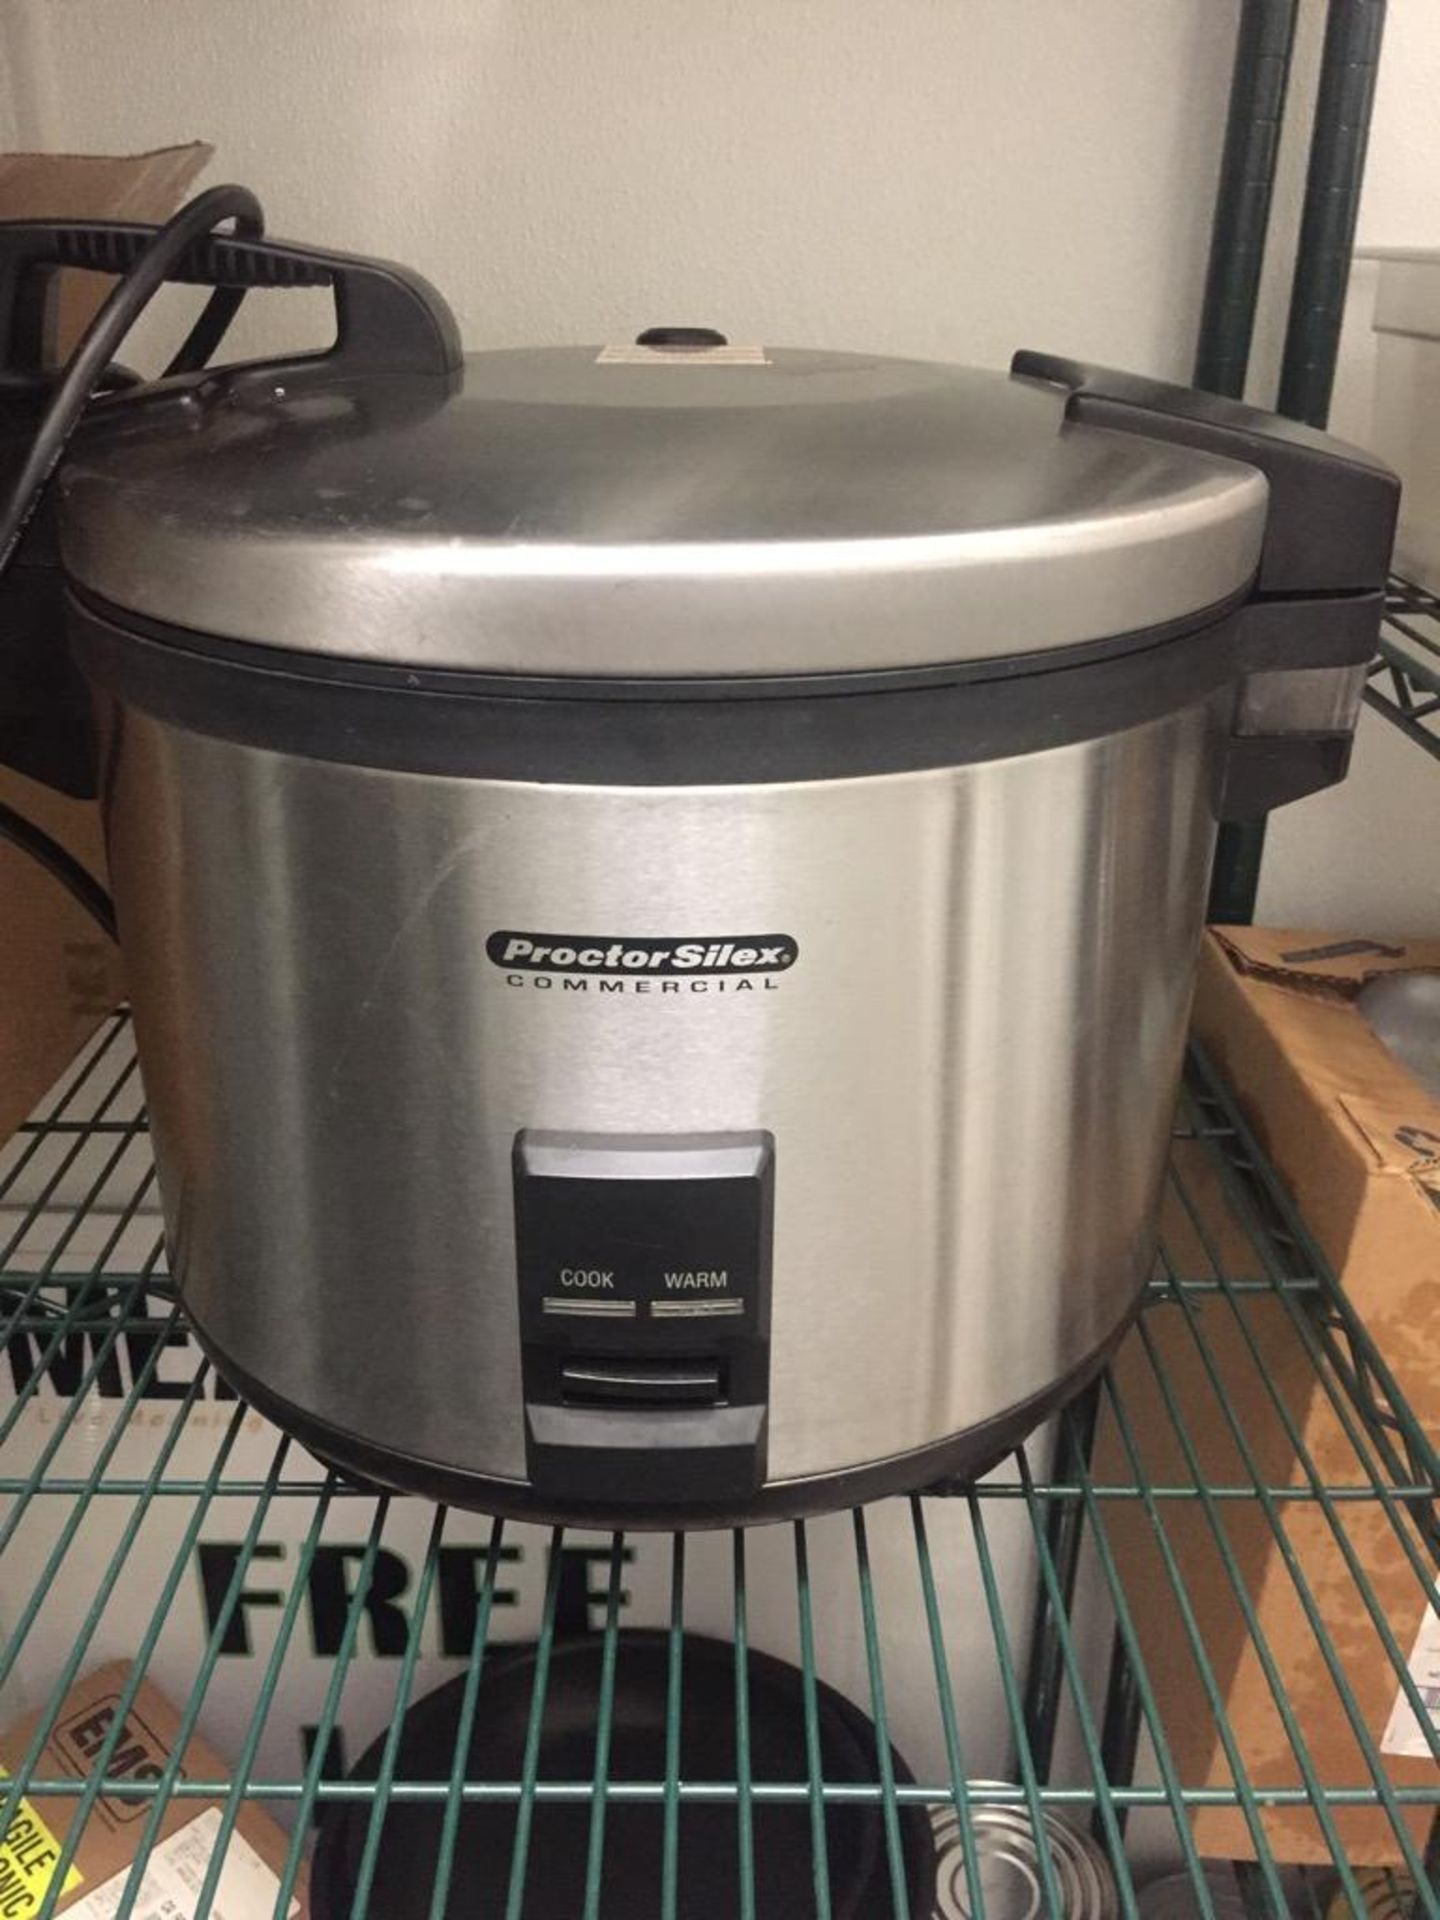 PROCTOR SILEX COMMERCIAL COOKER